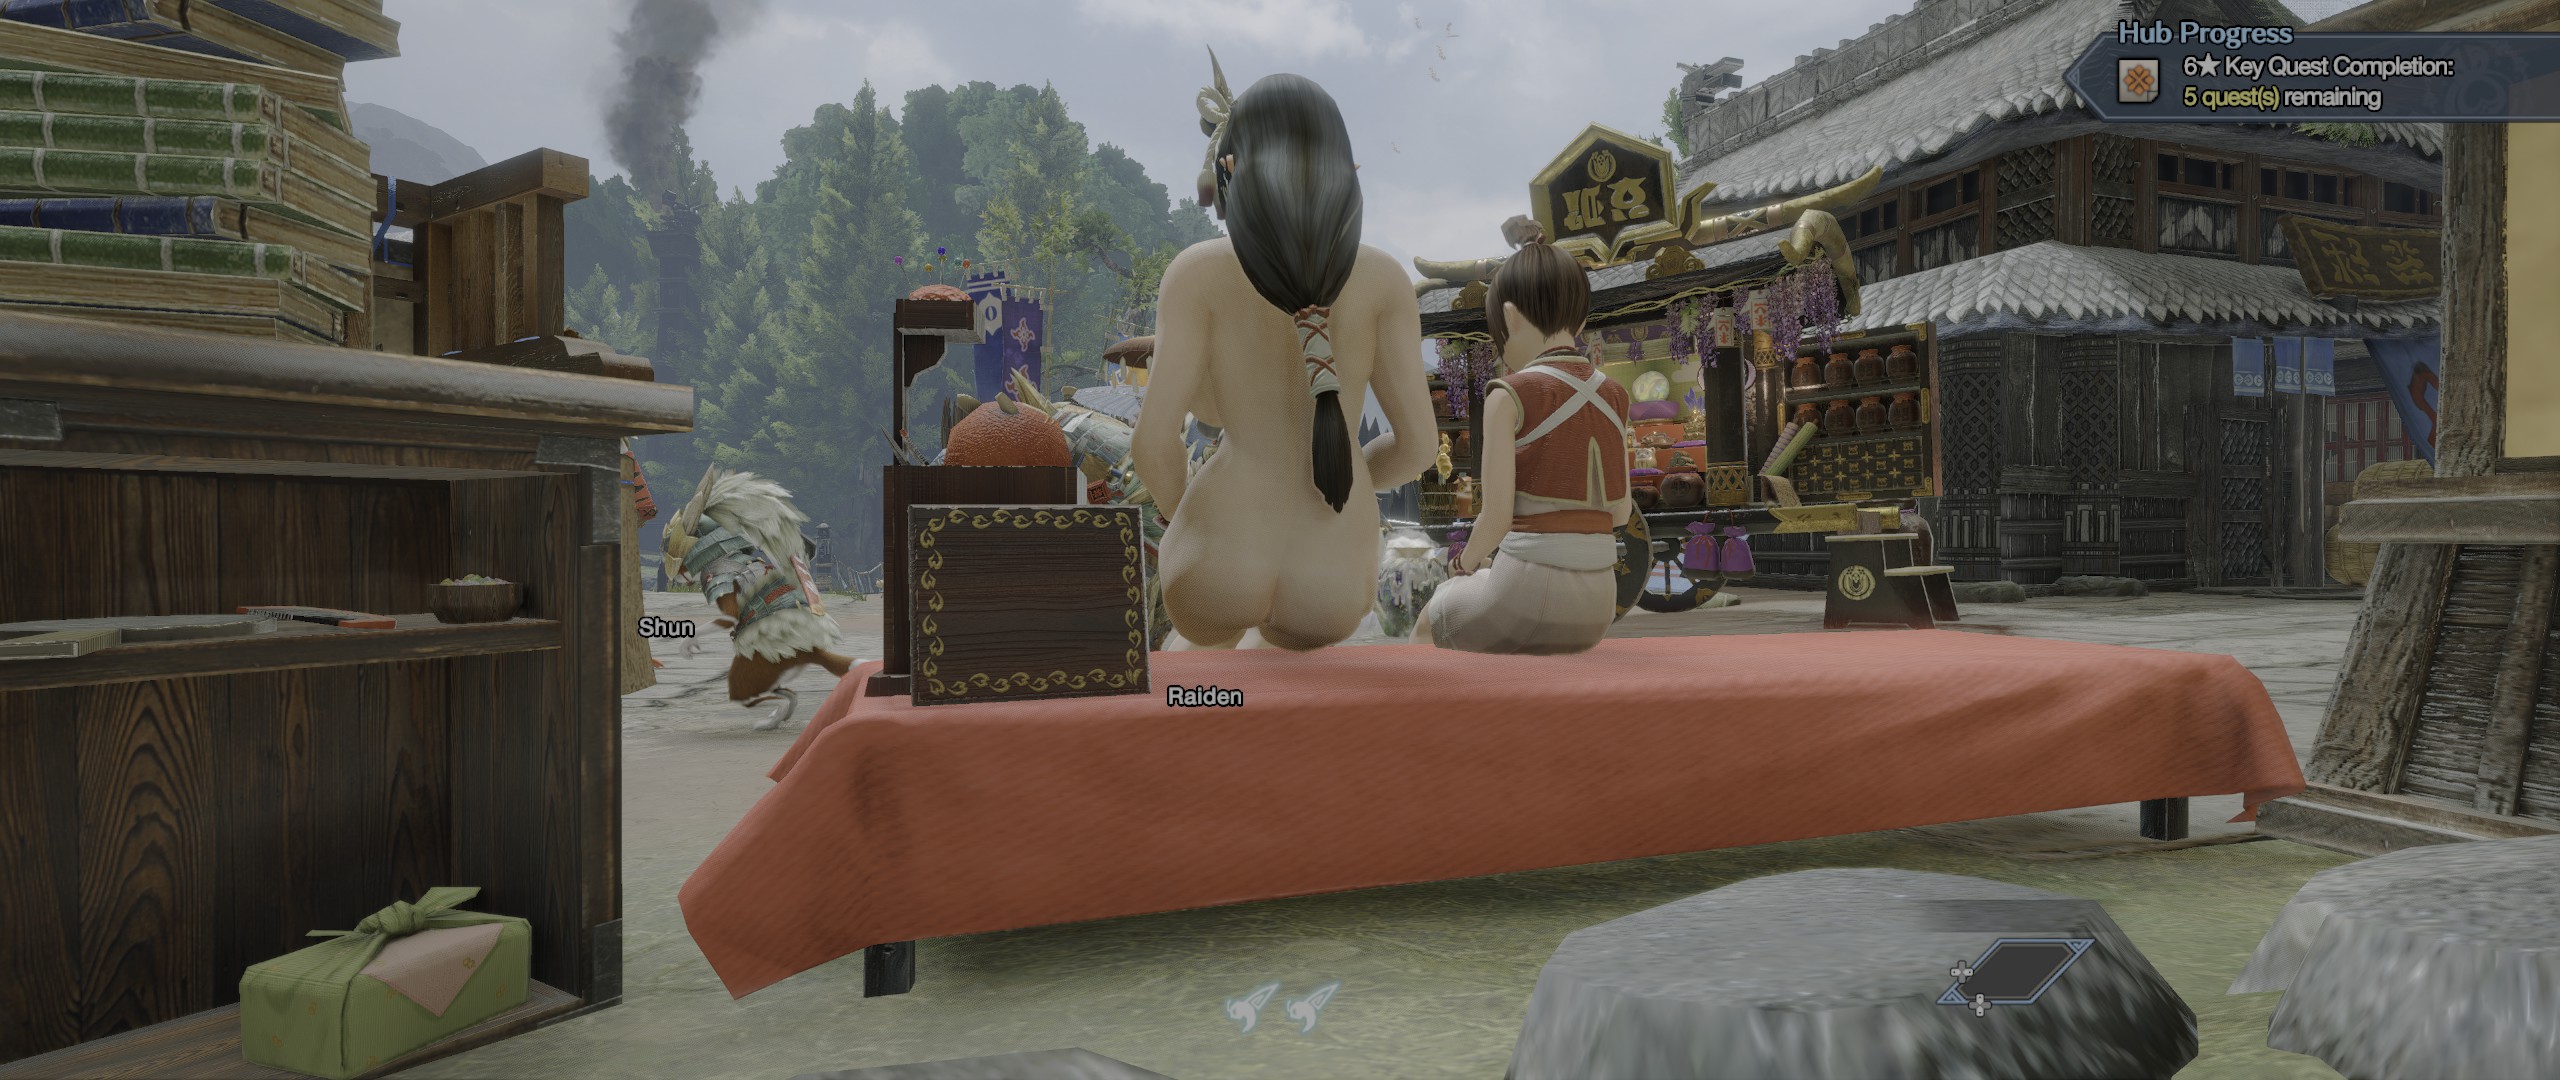 asnah ahmad recommends monster hunter nude mod pic